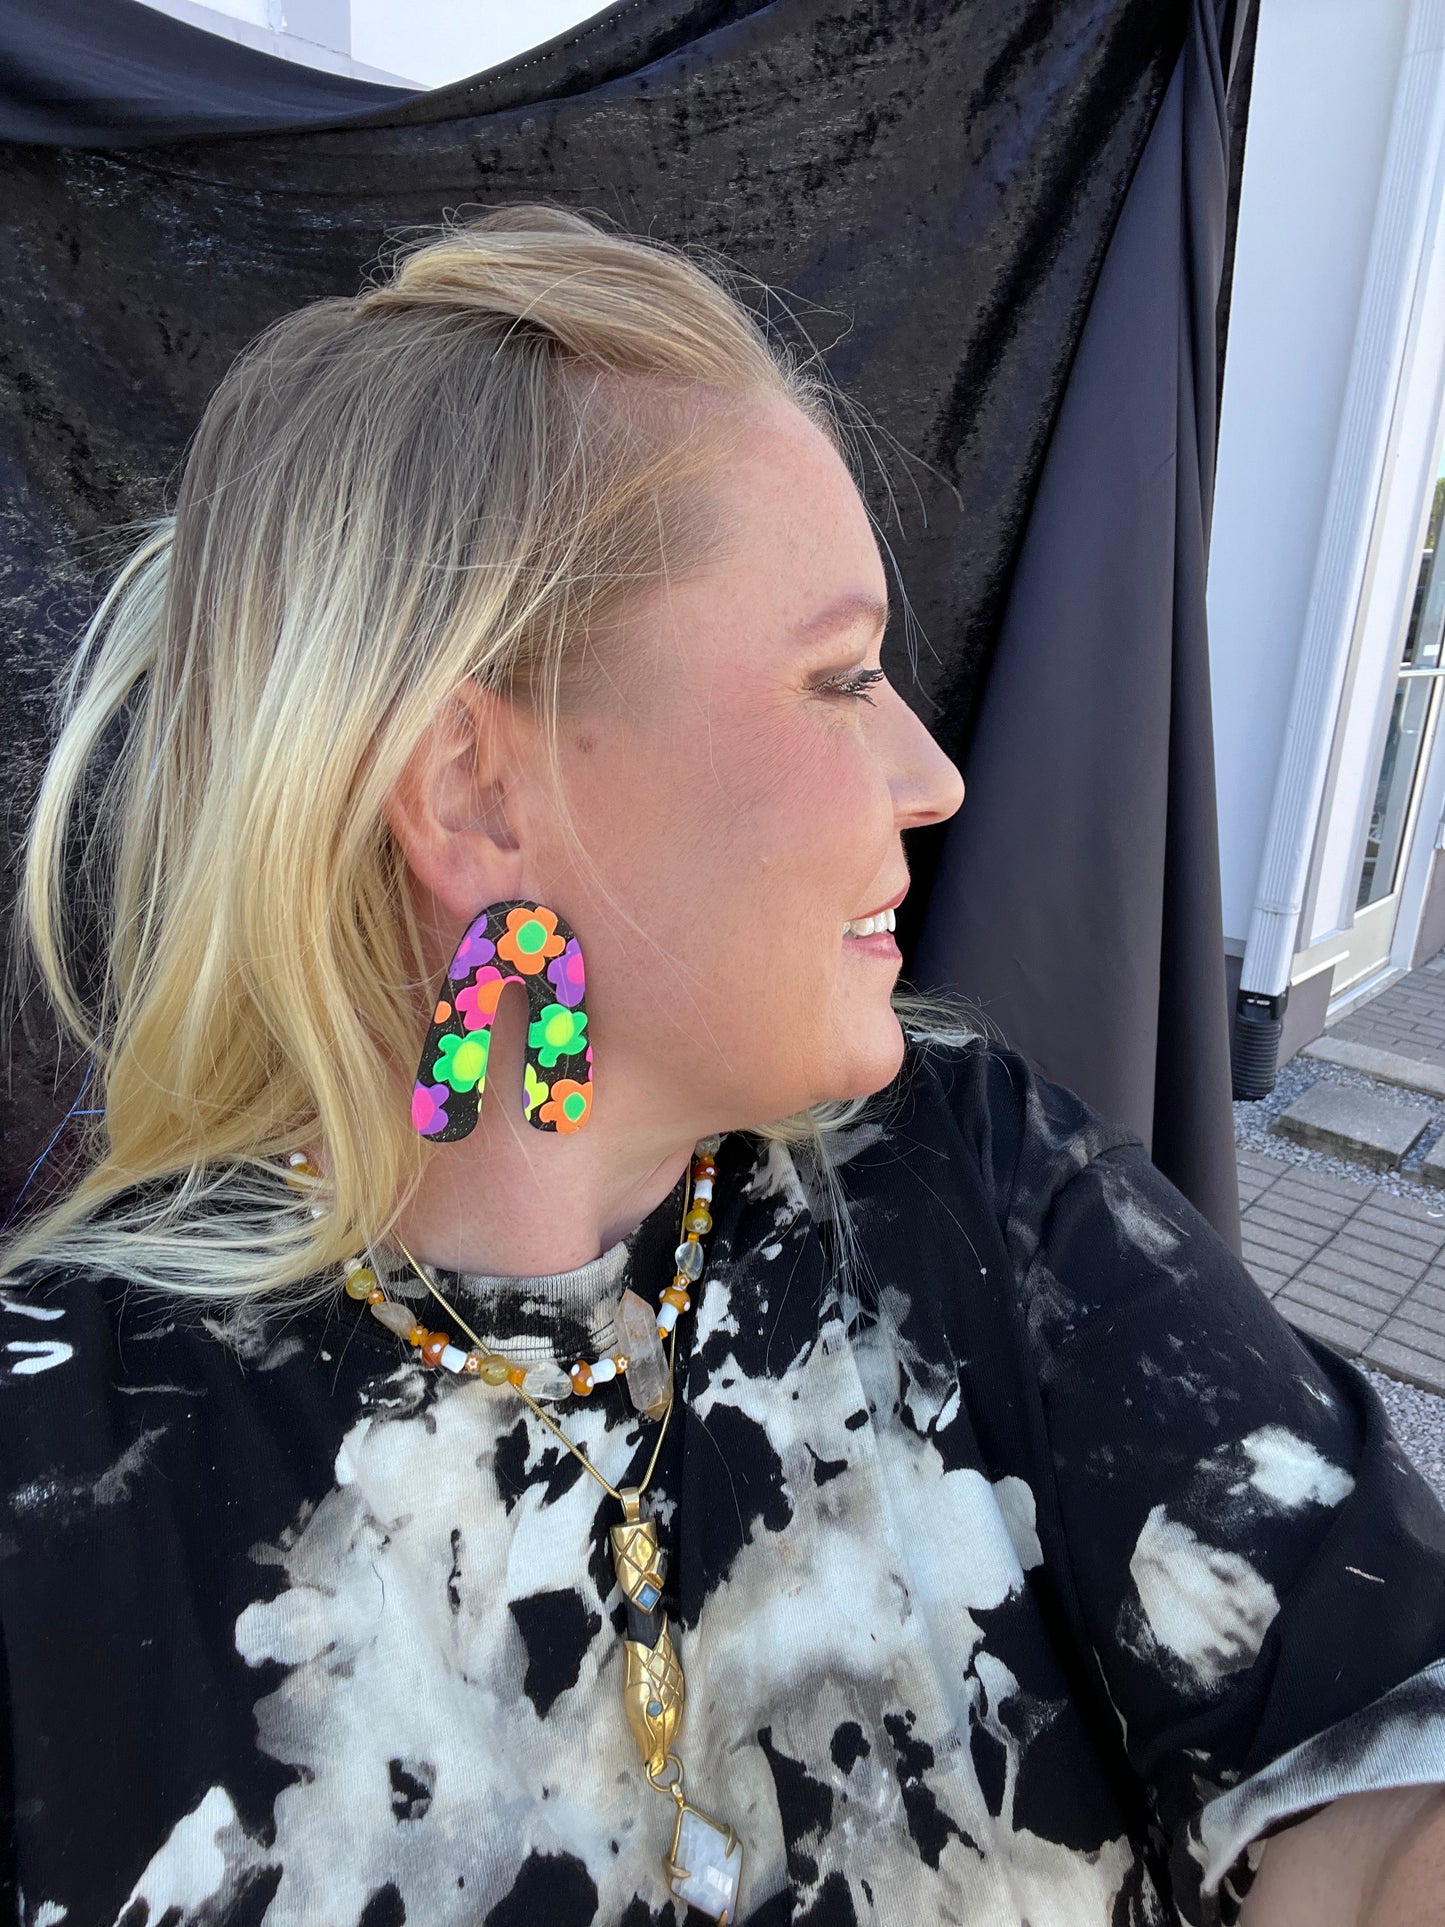 Oversized floral arch earrings